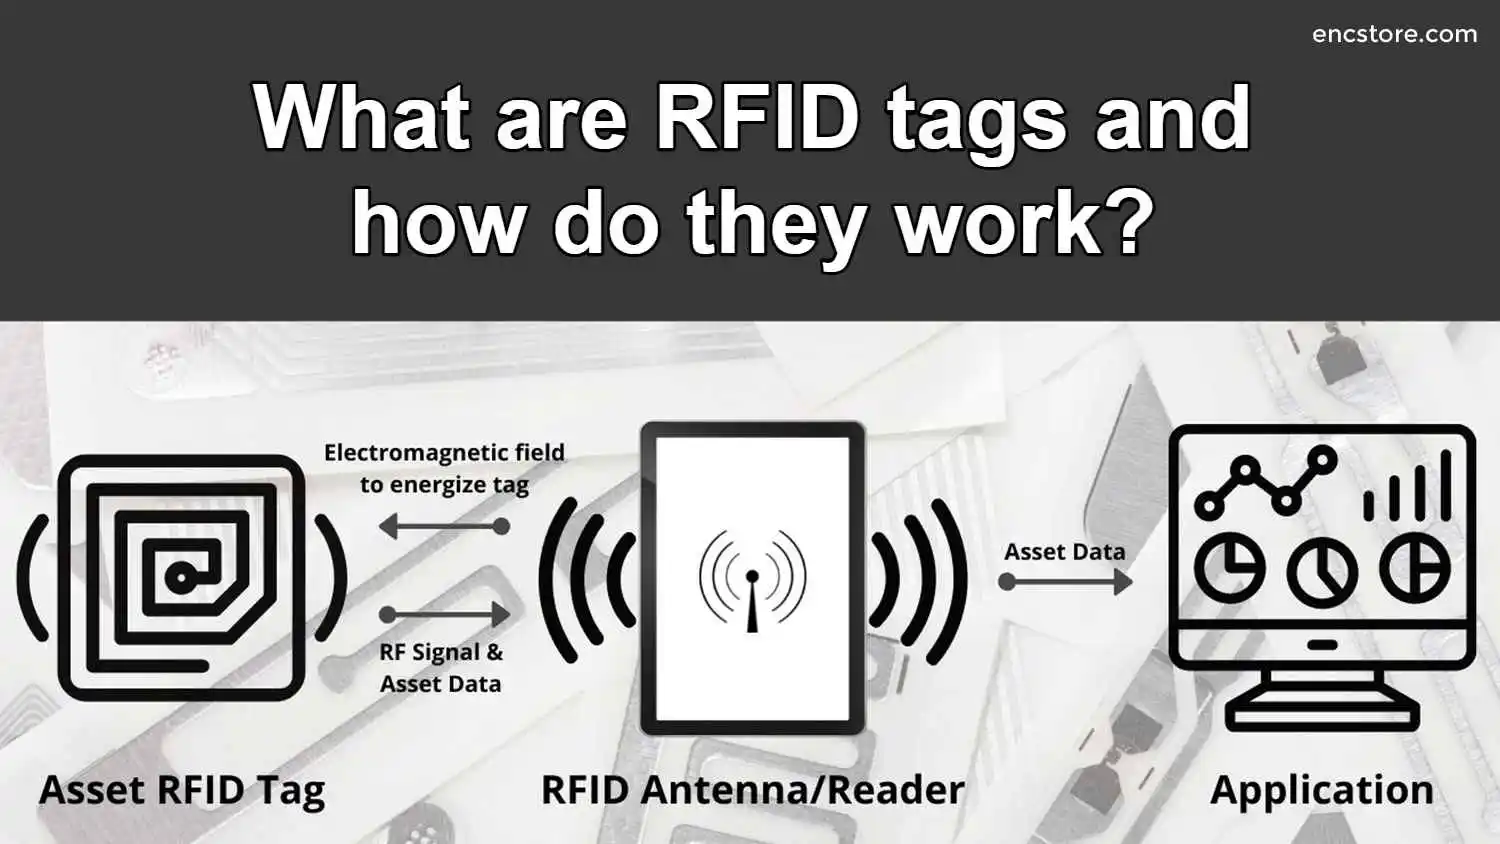 What are RFID tags and how do they work